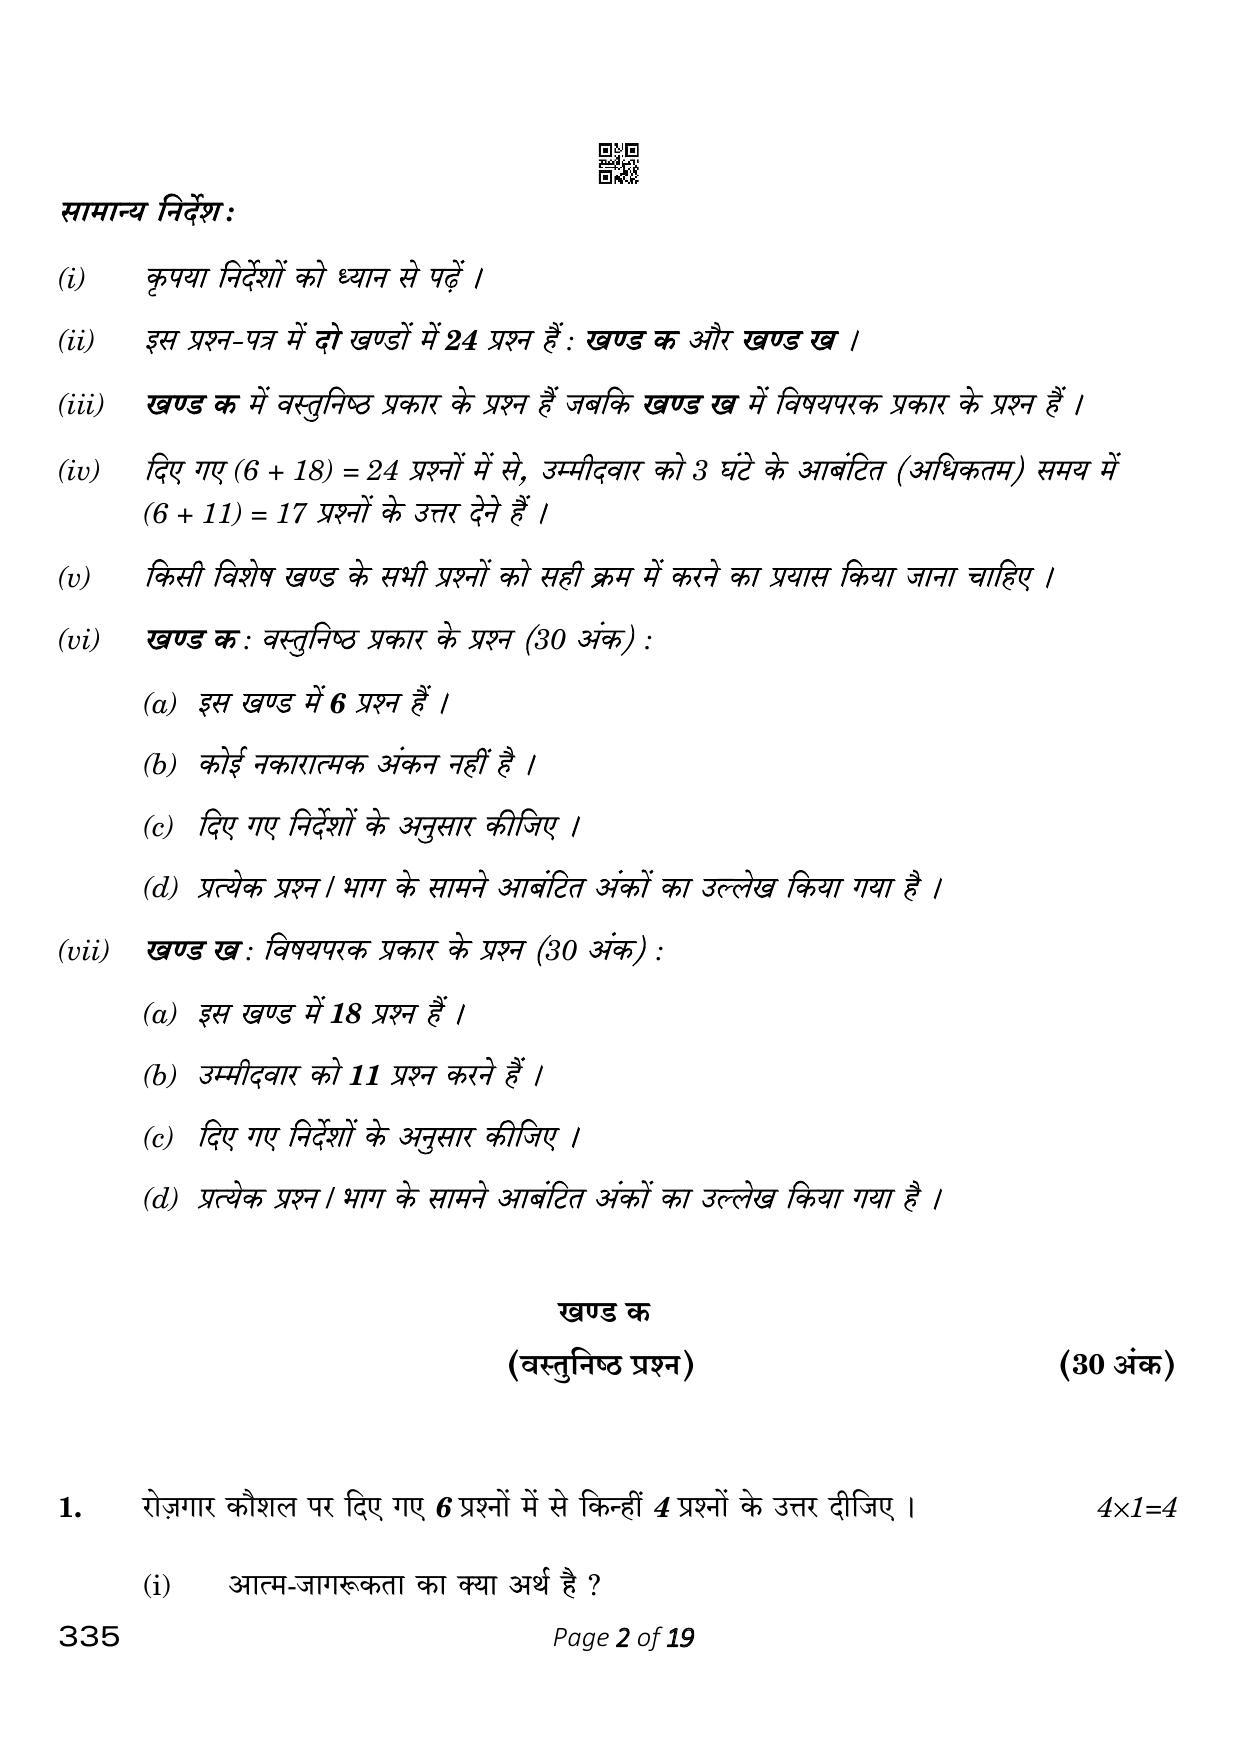 CBSE Class 12 335_Banking 2023 Question Paper - Page 2